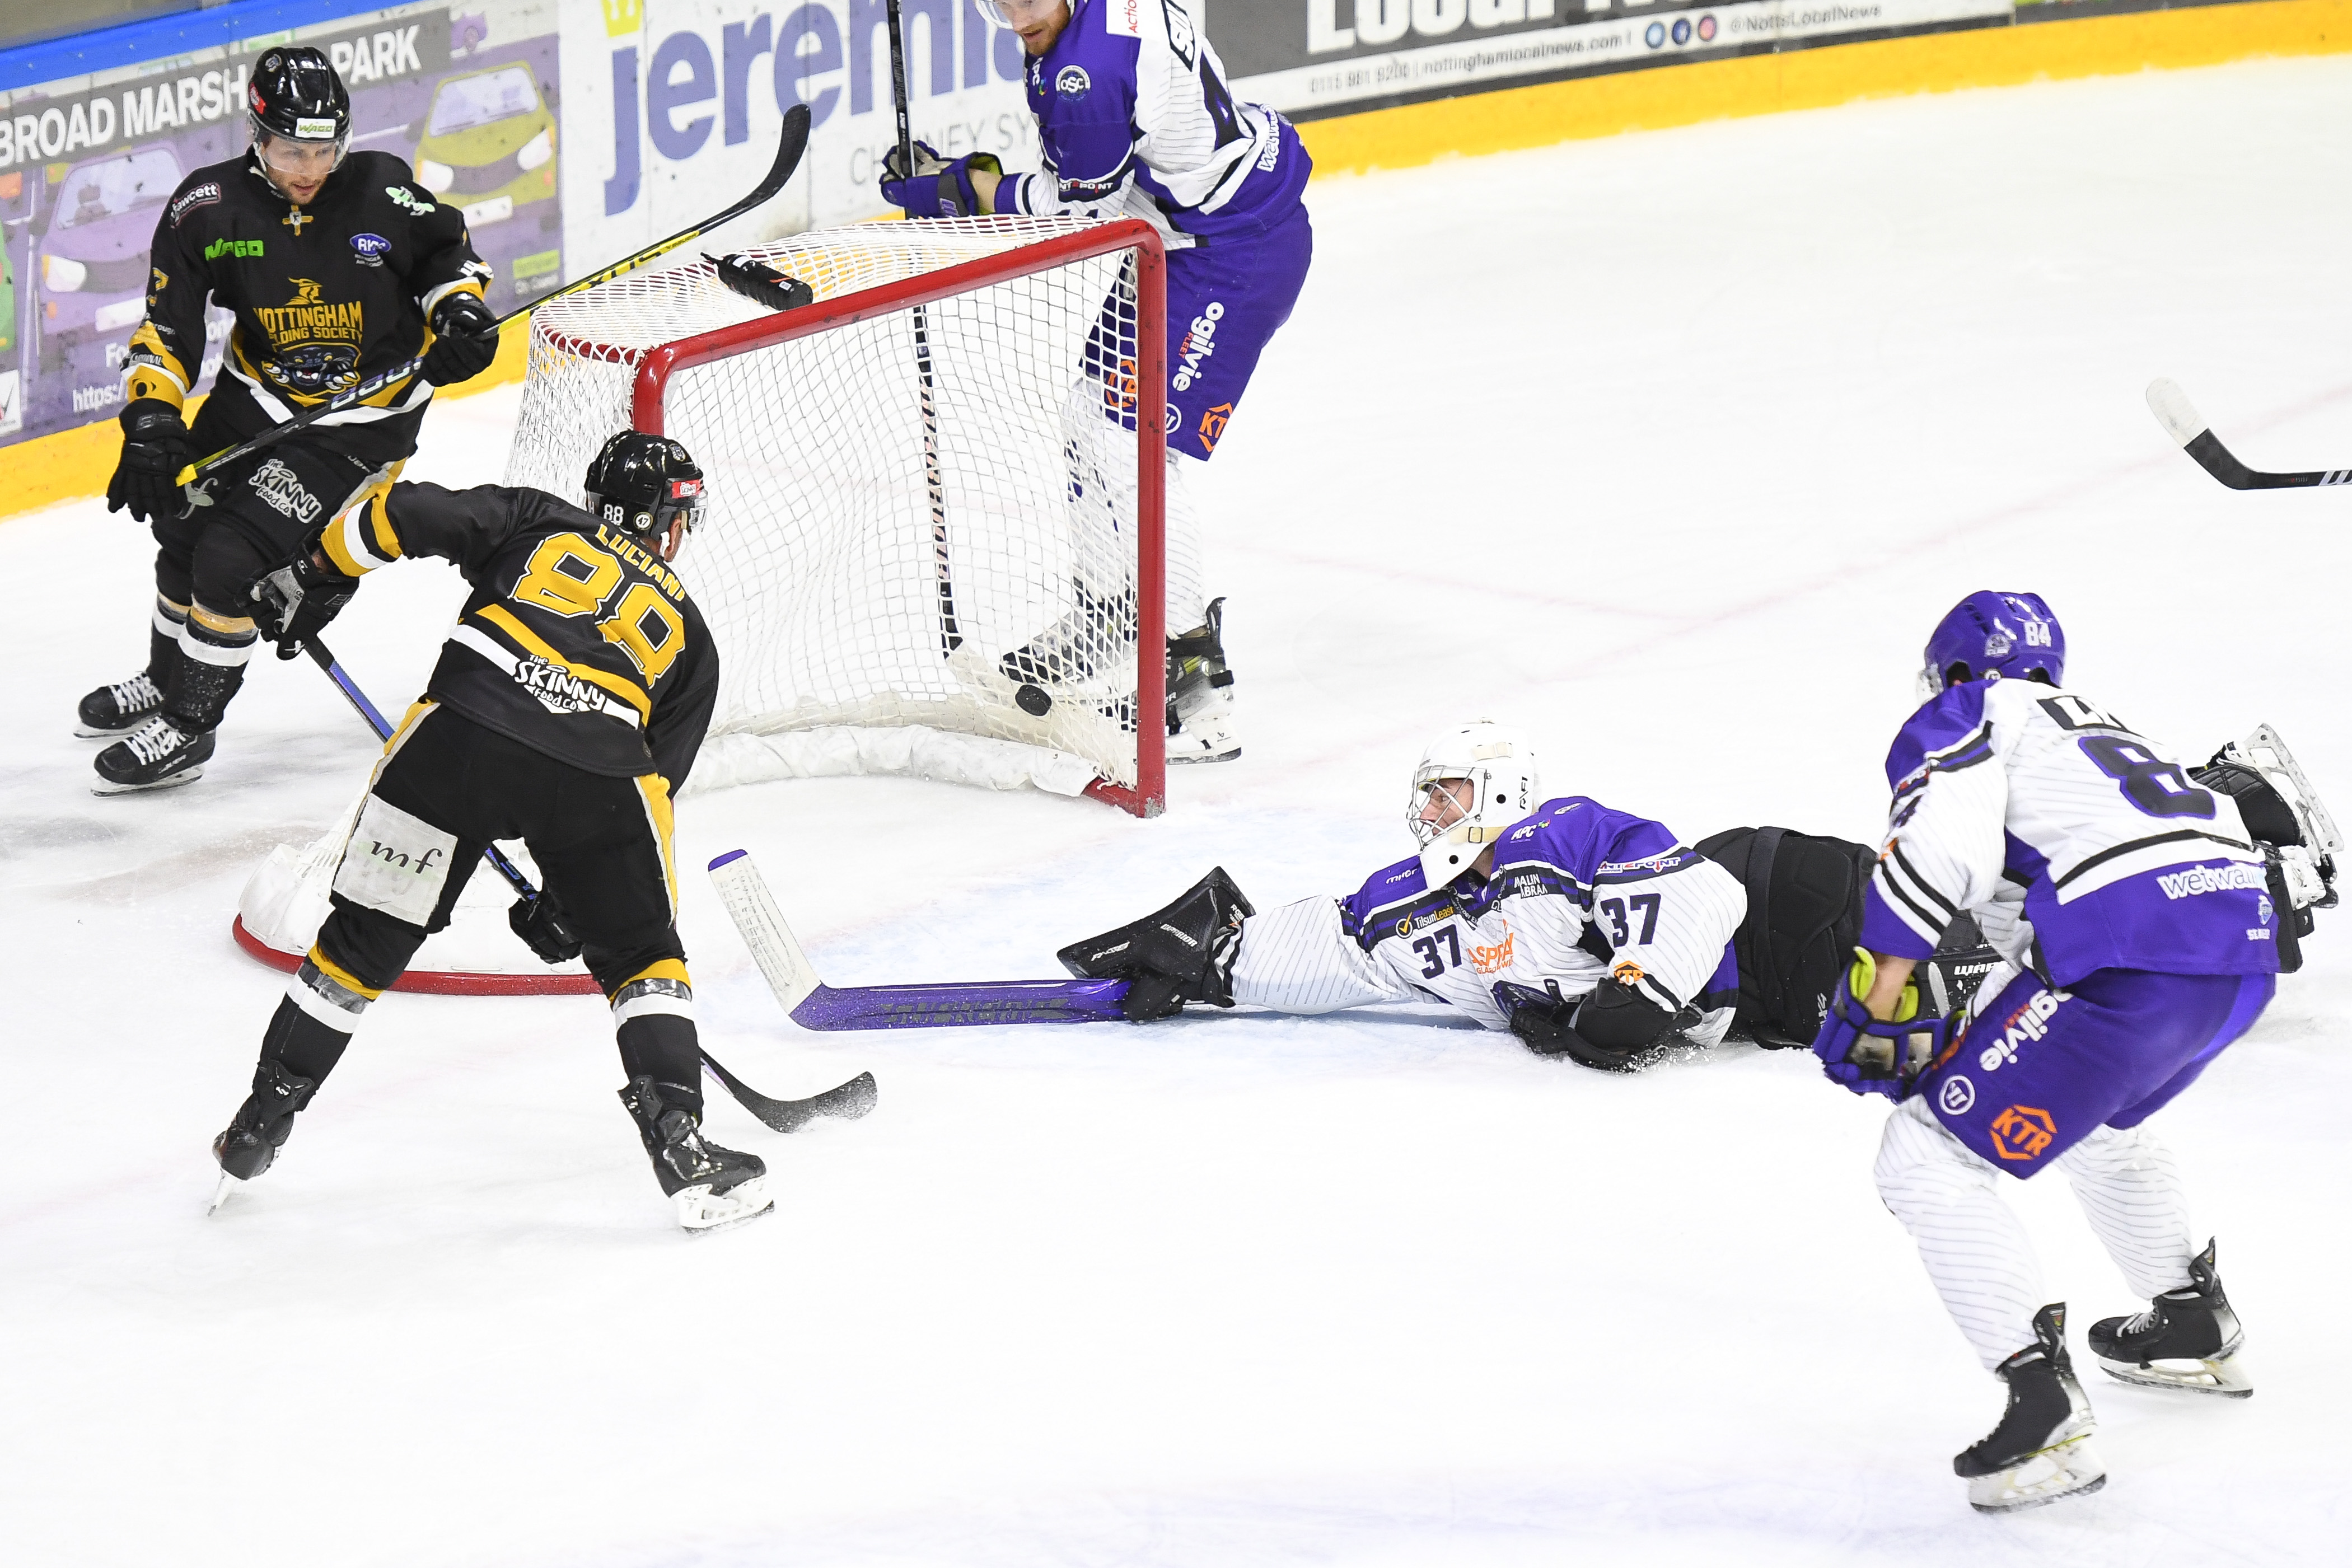 A HUGE GAMEDAY AS PANTHERS HOST CLAN Top Image